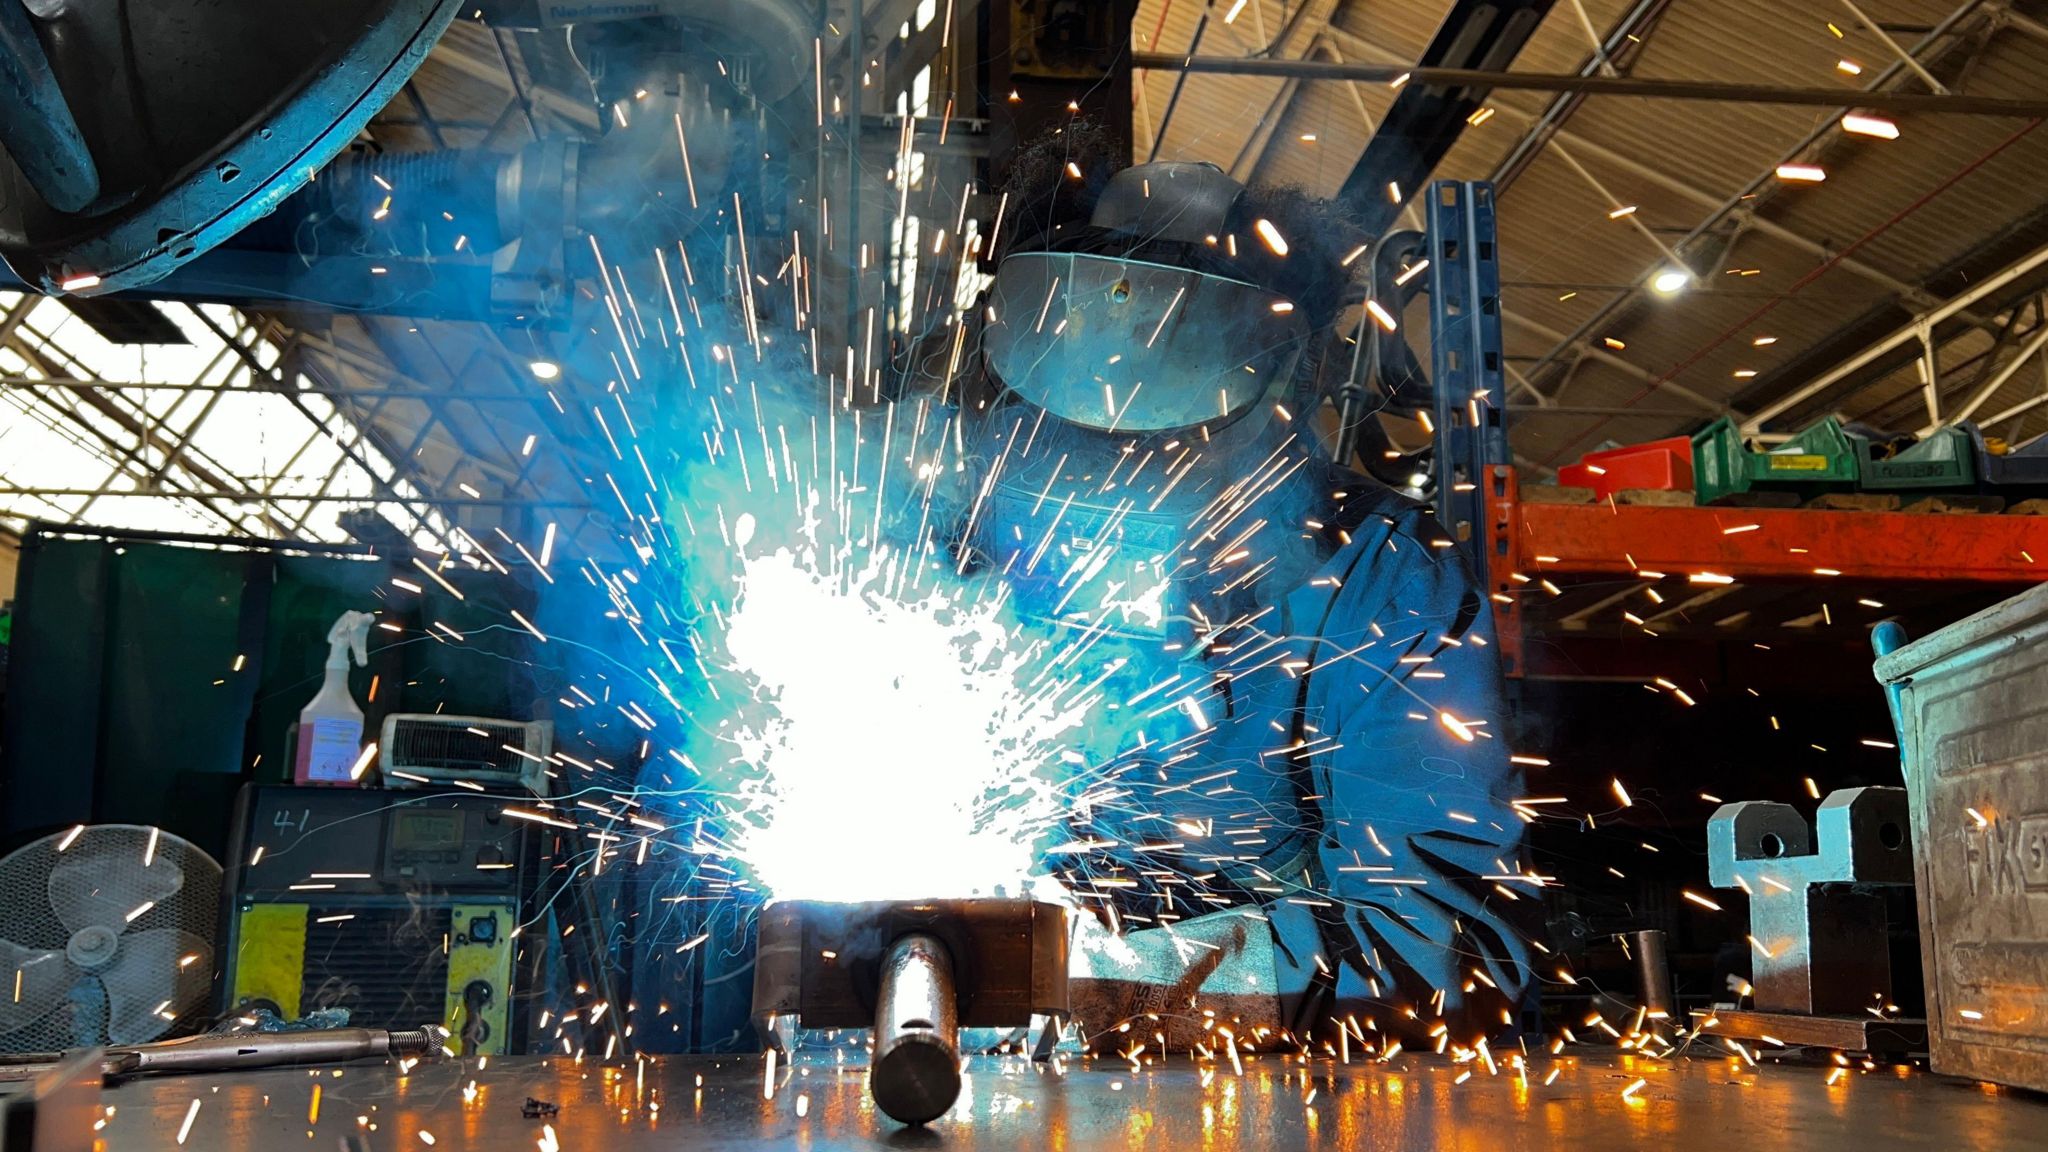 Gordon during his welding job. Sparks can be seen flying off metal